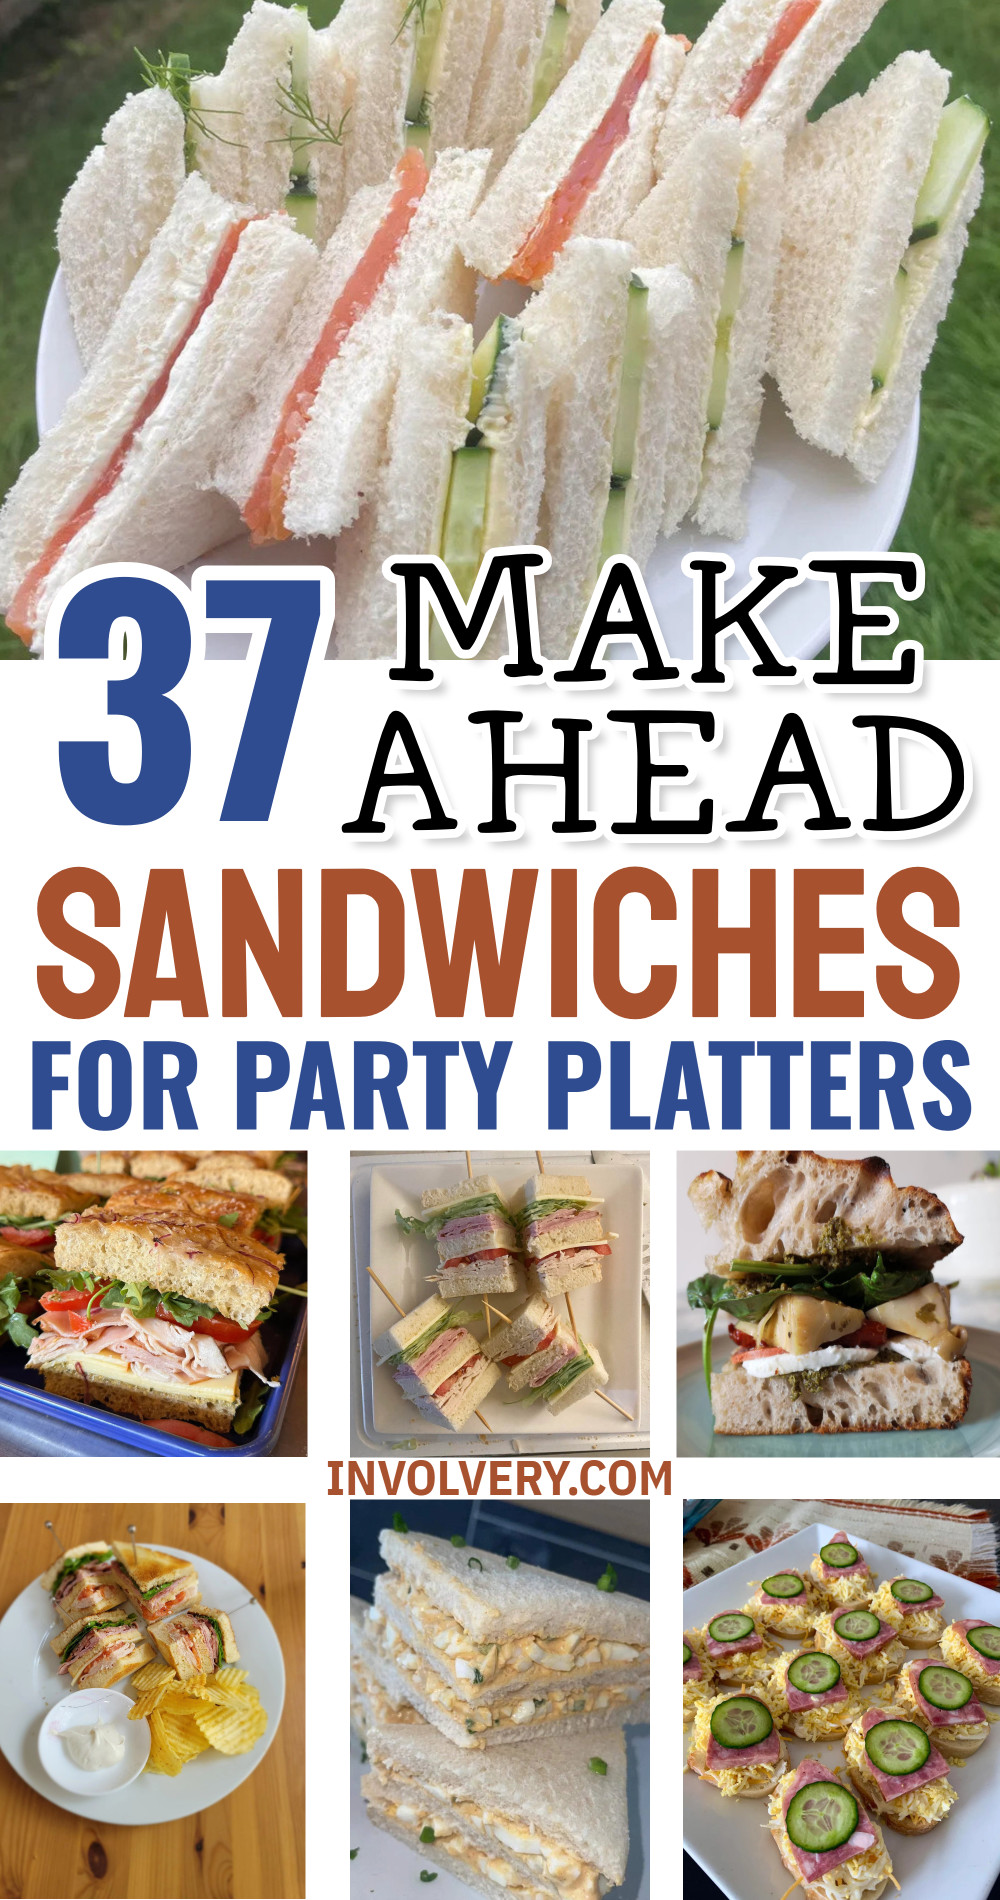 37 Make Ahead Sandwiches For Party Platters